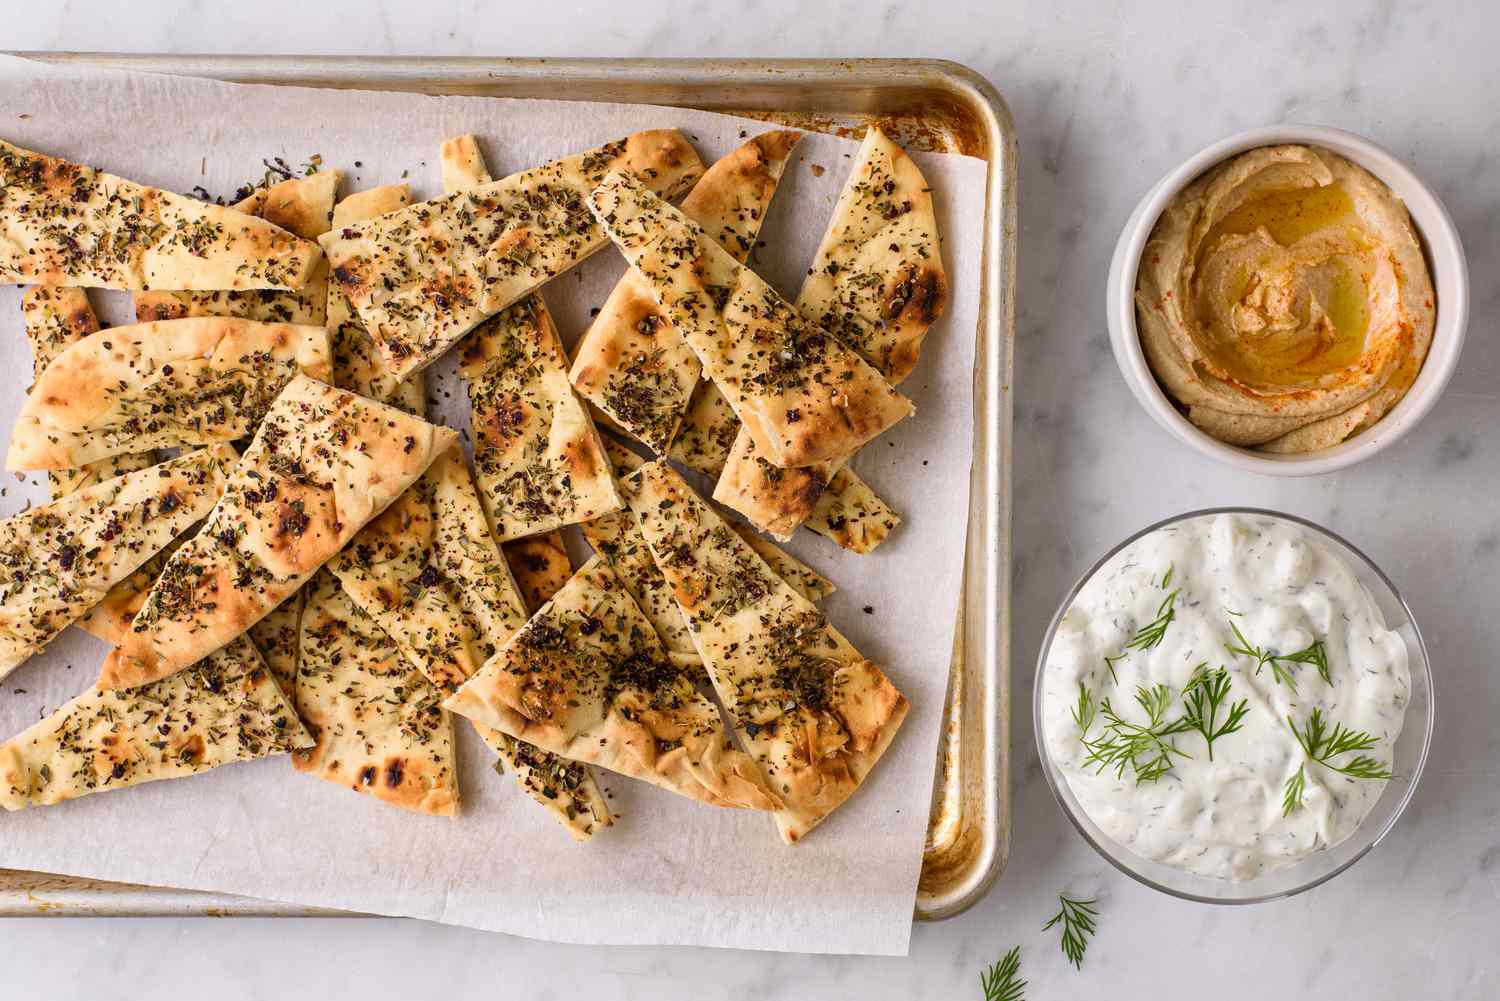 Naan sprinkled with za'atar spice mixture